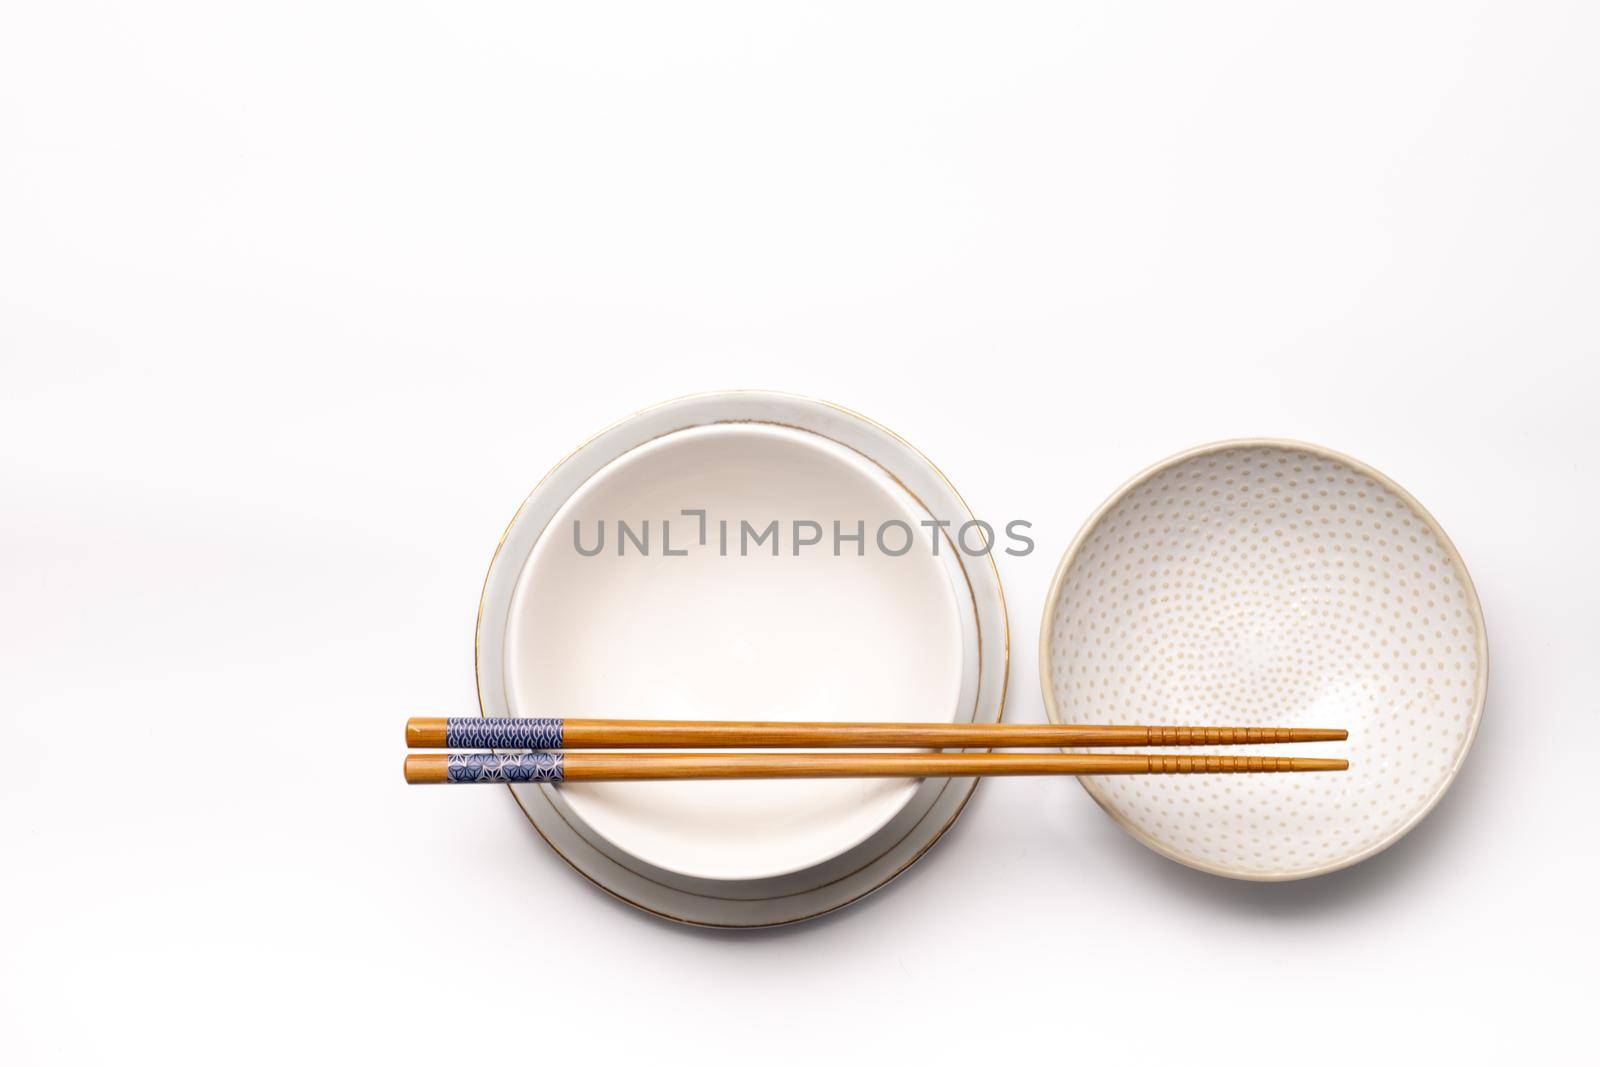 Three empty dishes or cups of blanc earthenware with chopsticks isolated on a white background seen from above or top view by LeoniekvanderVliet